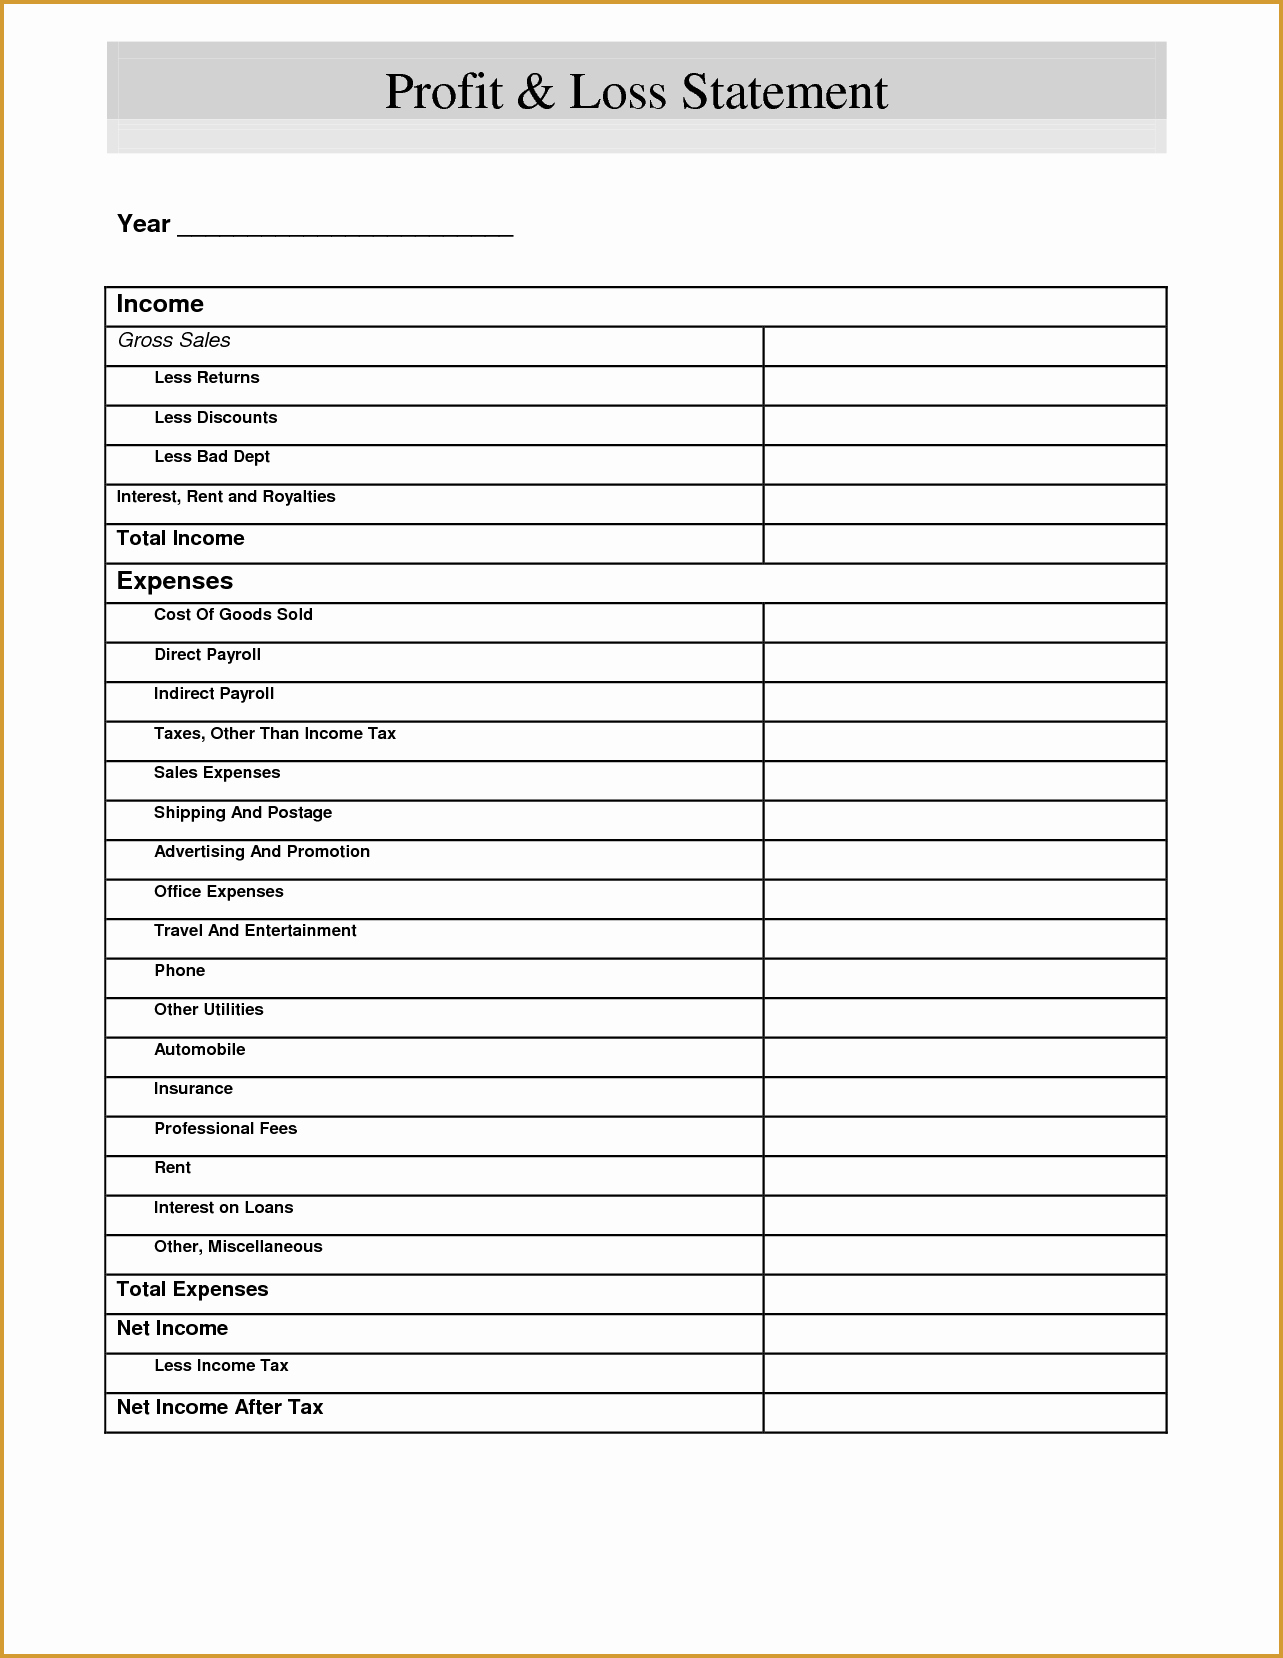 Blank Profit and Loss Template Best Of Free Profit and Loss Statement Template form